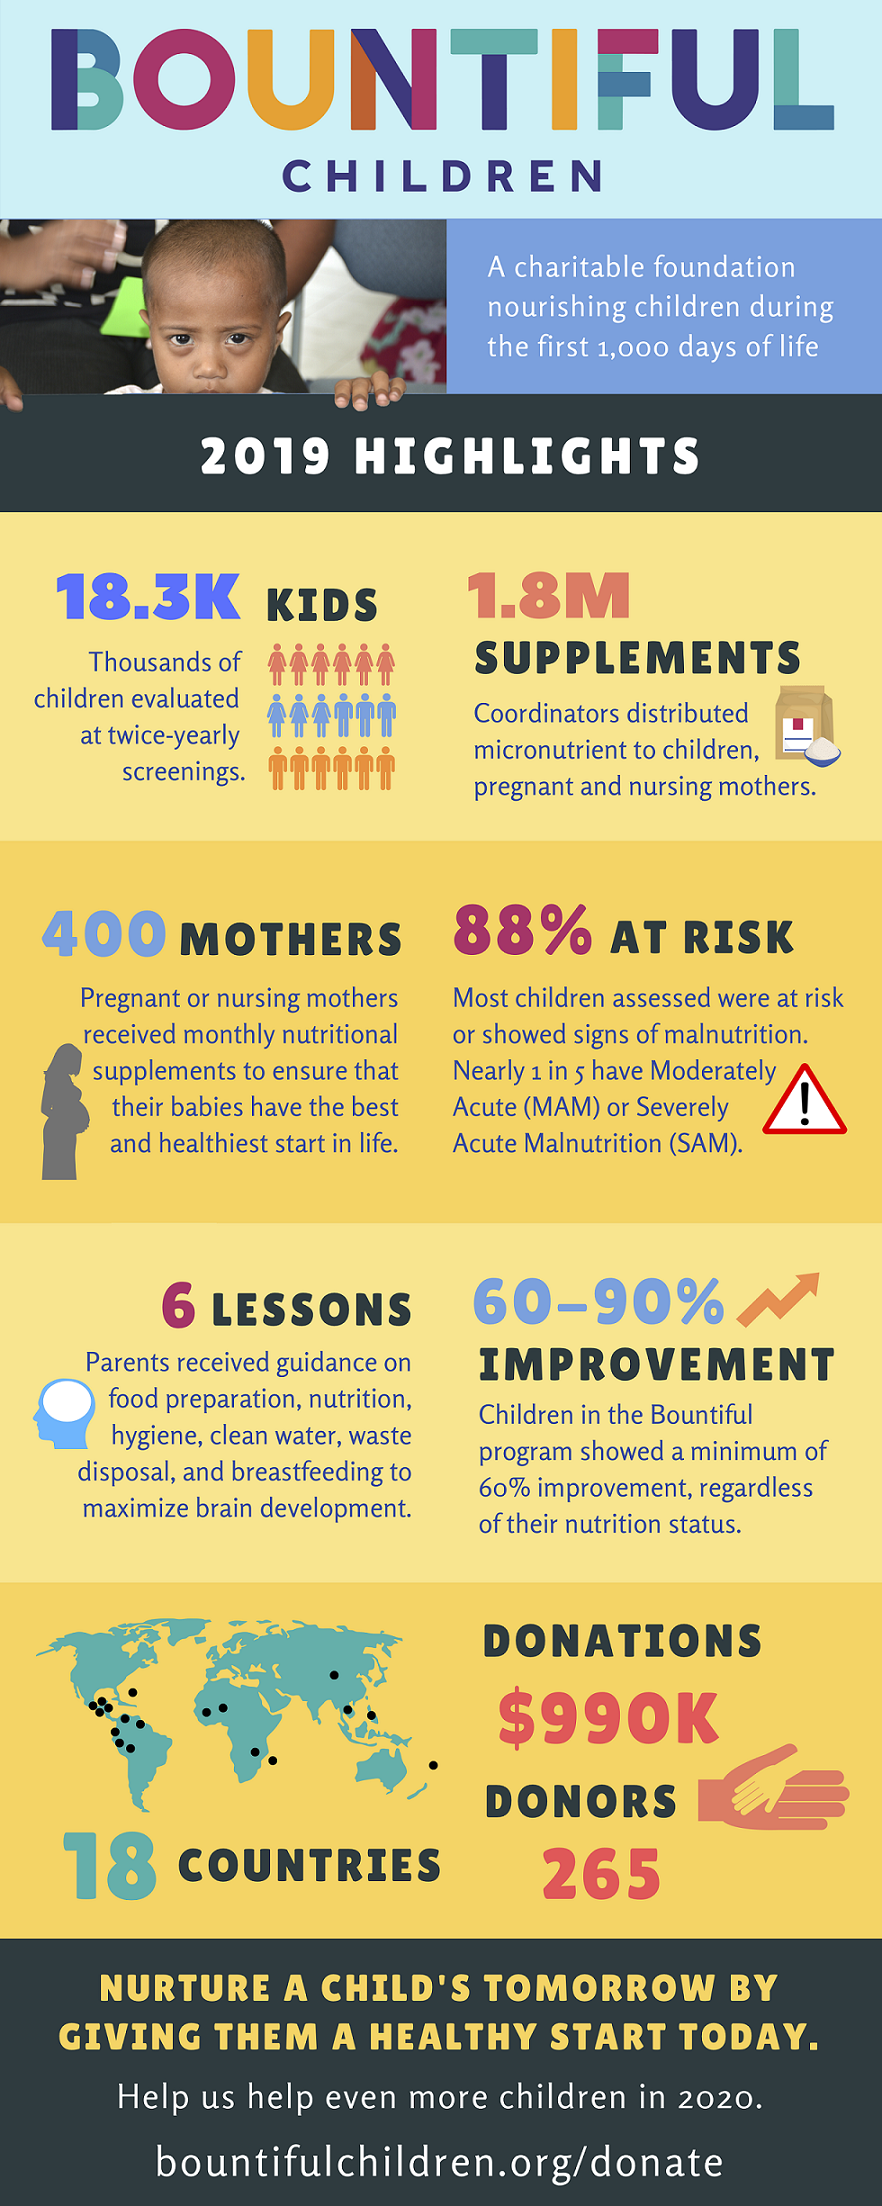 Bountiful-Children-2019-Highlights-Infographic-resized